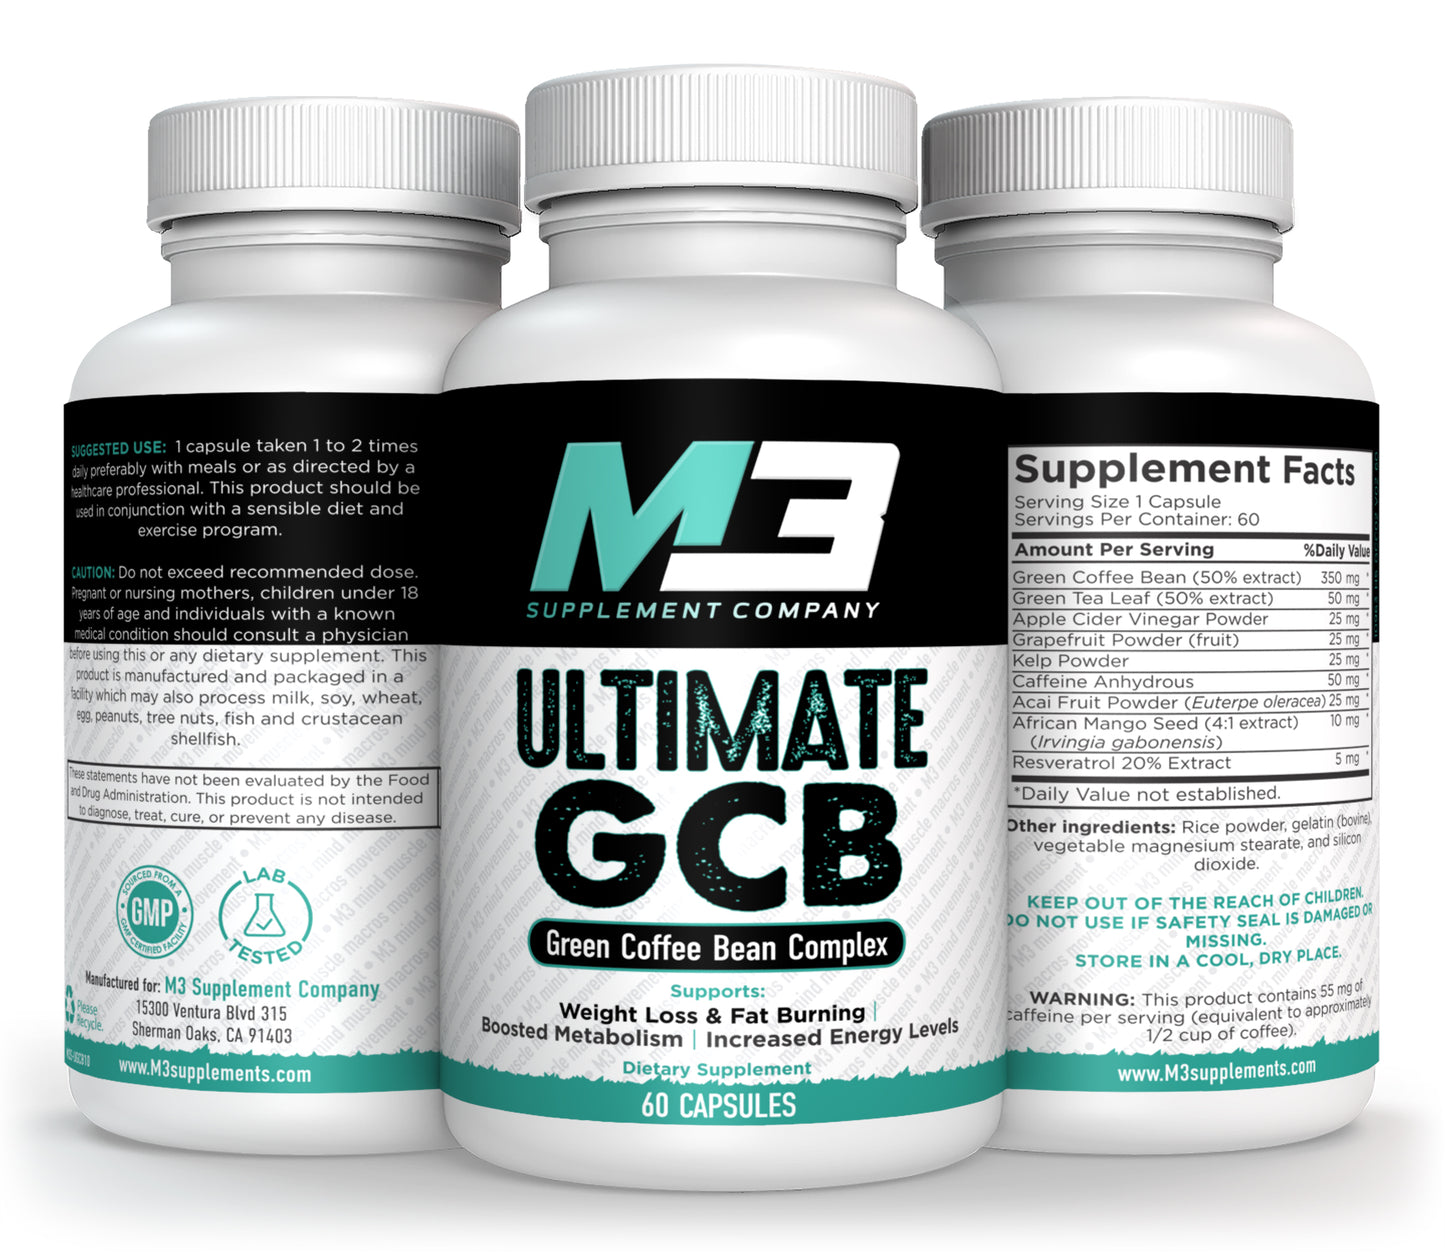 Ultimate GCB is a Product of M3 Supplements. It is a Green Coffee Bean Complex.